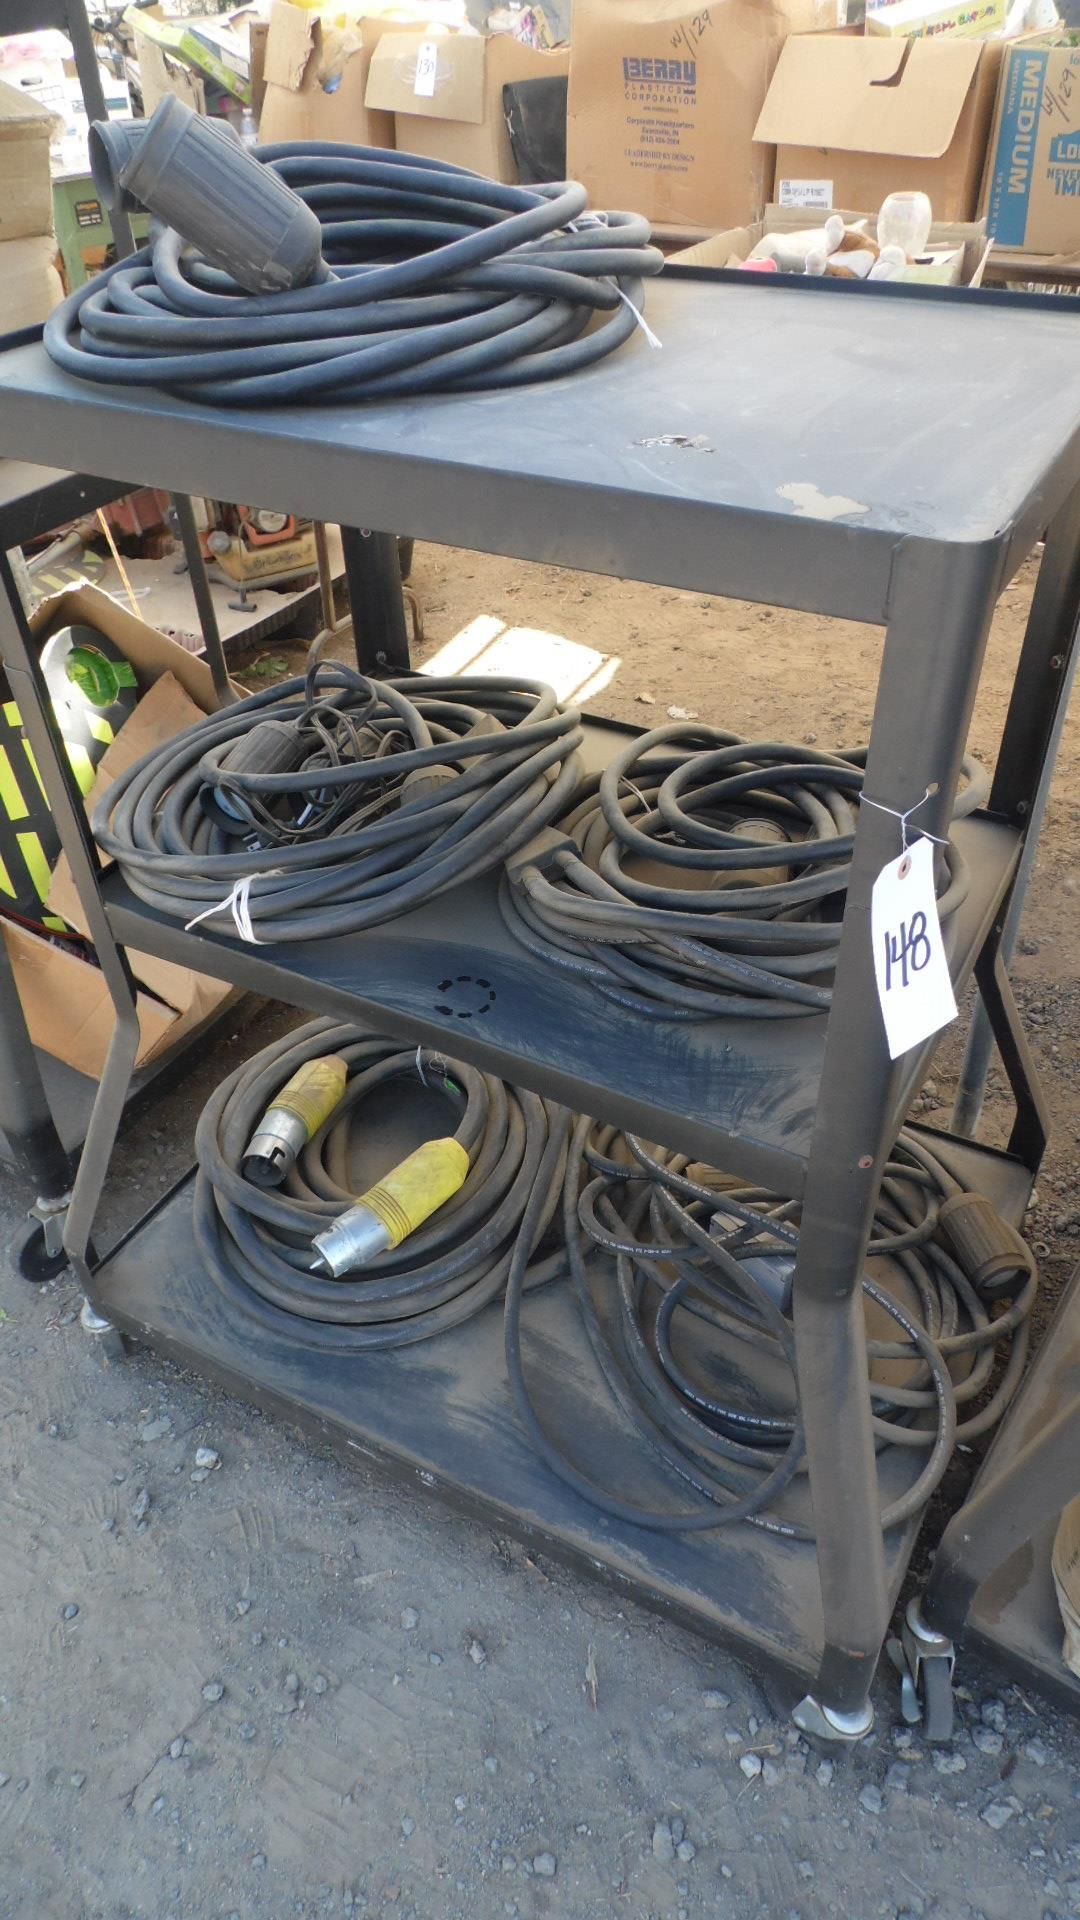 ASSORTED ELECTRICAL CORDS